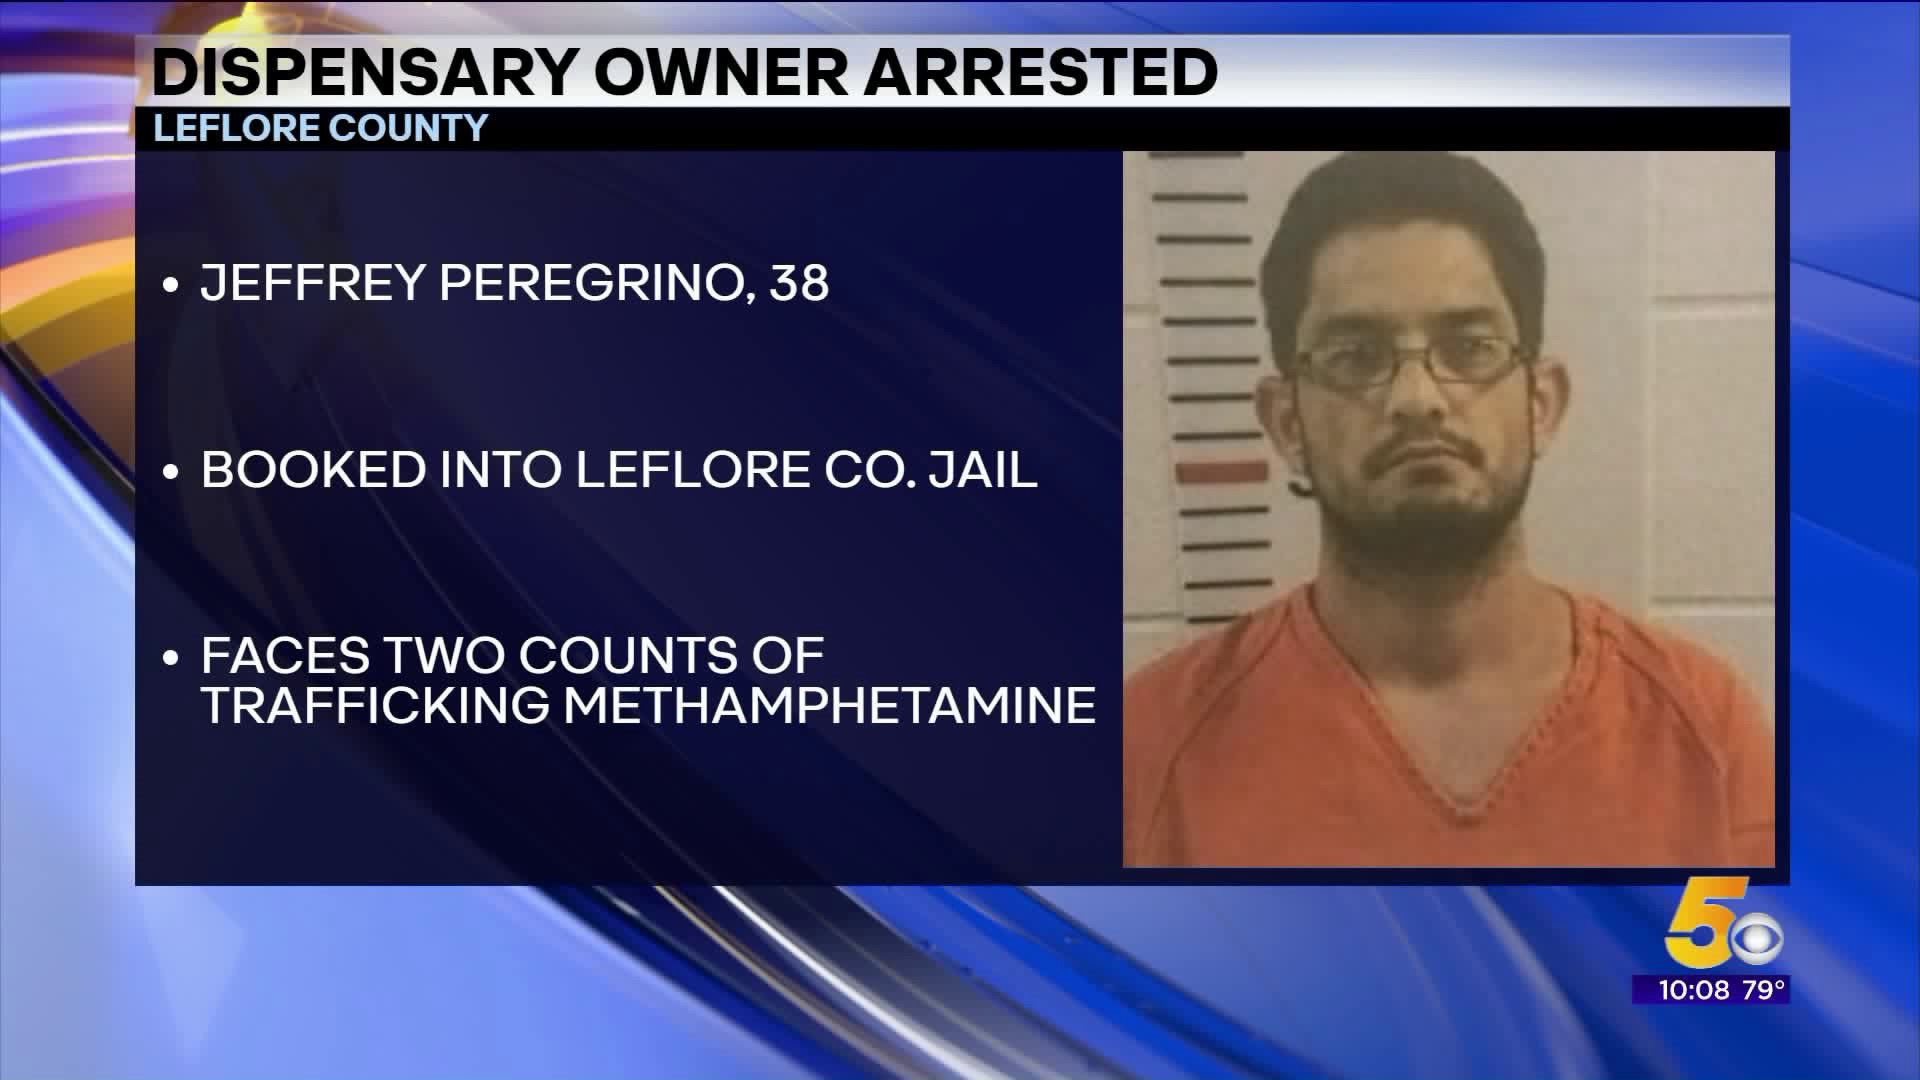 Oklahoma Dispensary Owner Arrested For Selling Meth